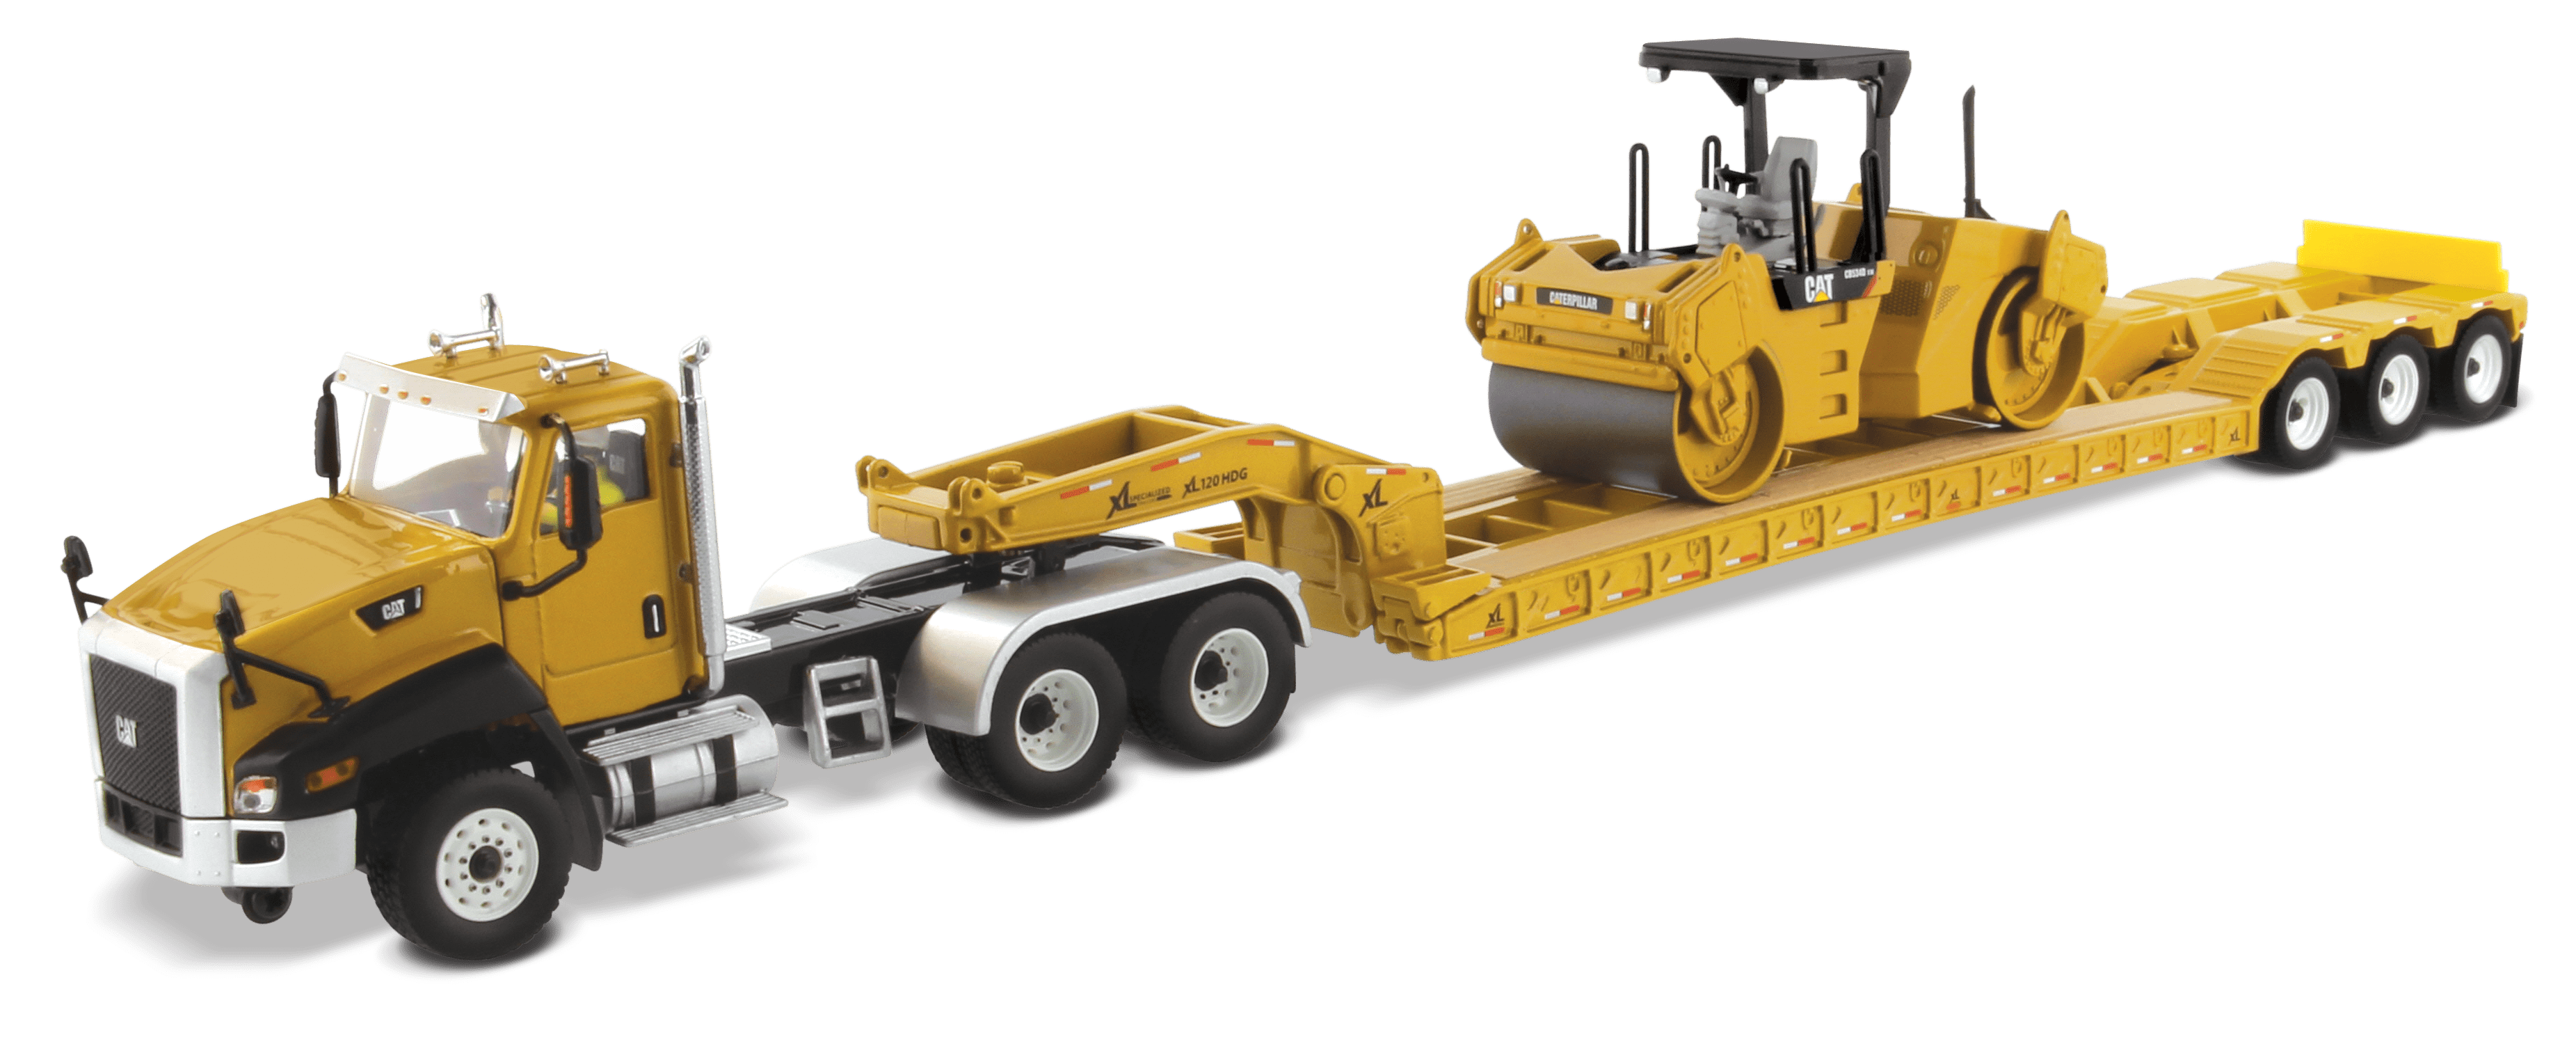 Caterpillar Cat CT660 Day Cab with XL Lowboy Trailer and CB-534D Compactor 1:50 Scale Adult Collectible Diecast Model Replica